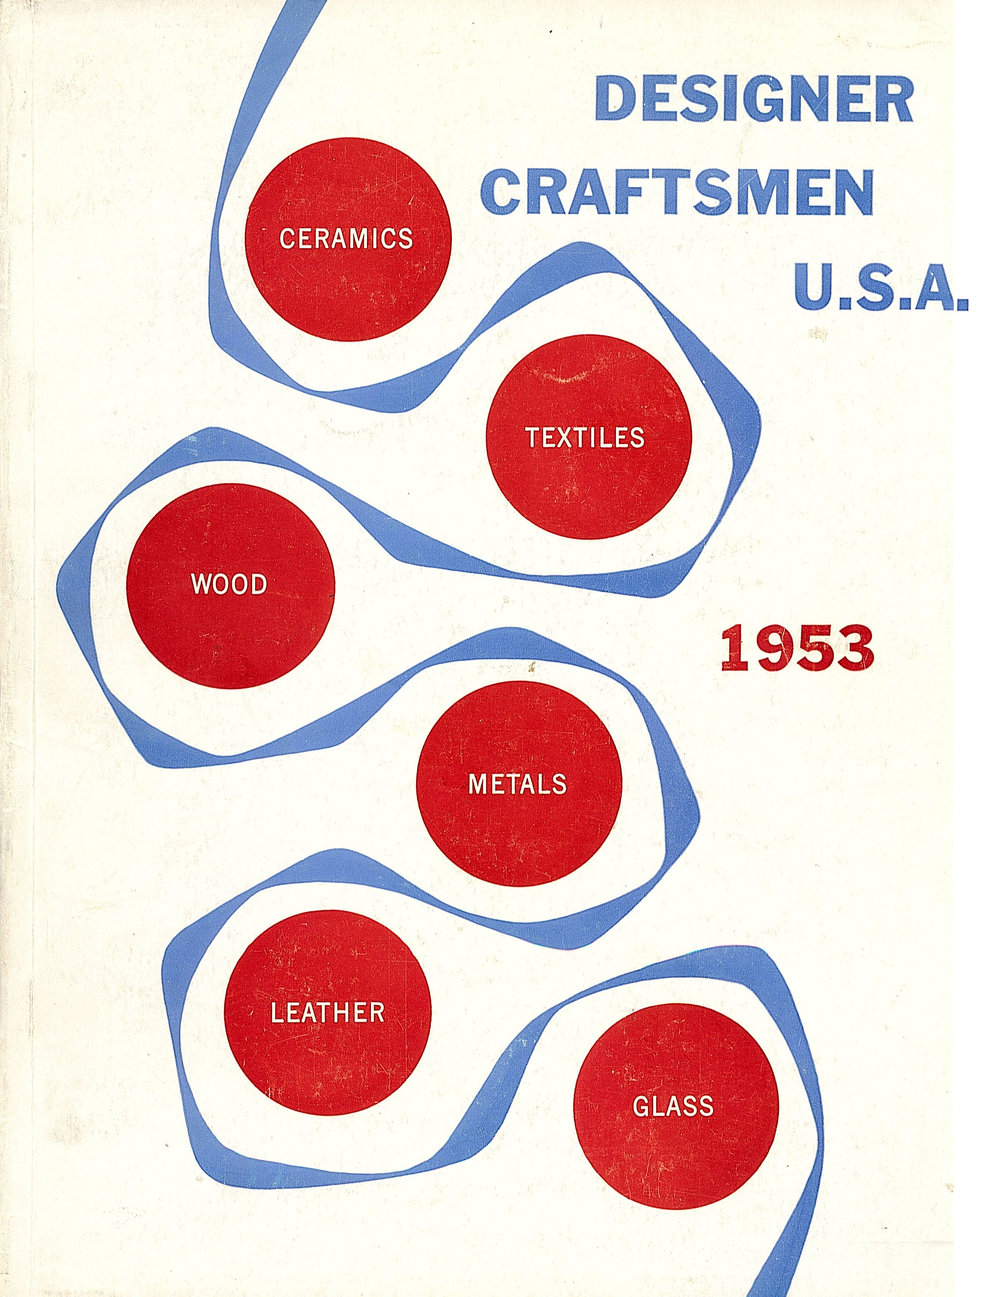 Courtesy of the American Craft Council.